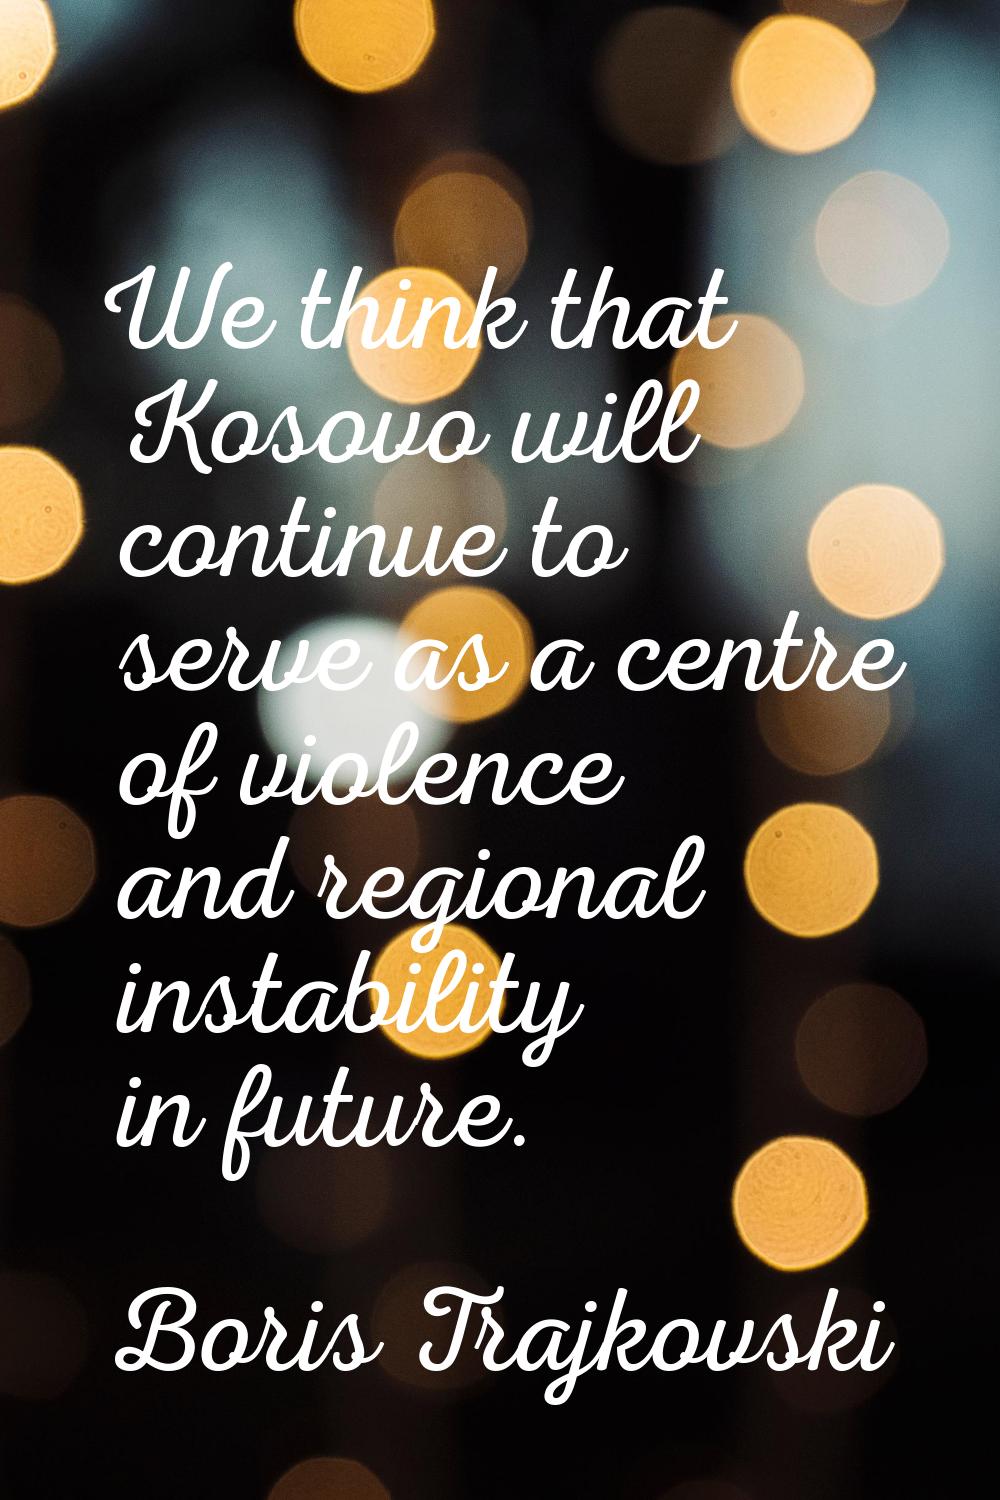 We think that Kosovo will continue to serve as a centre of violence and regional instability in fut